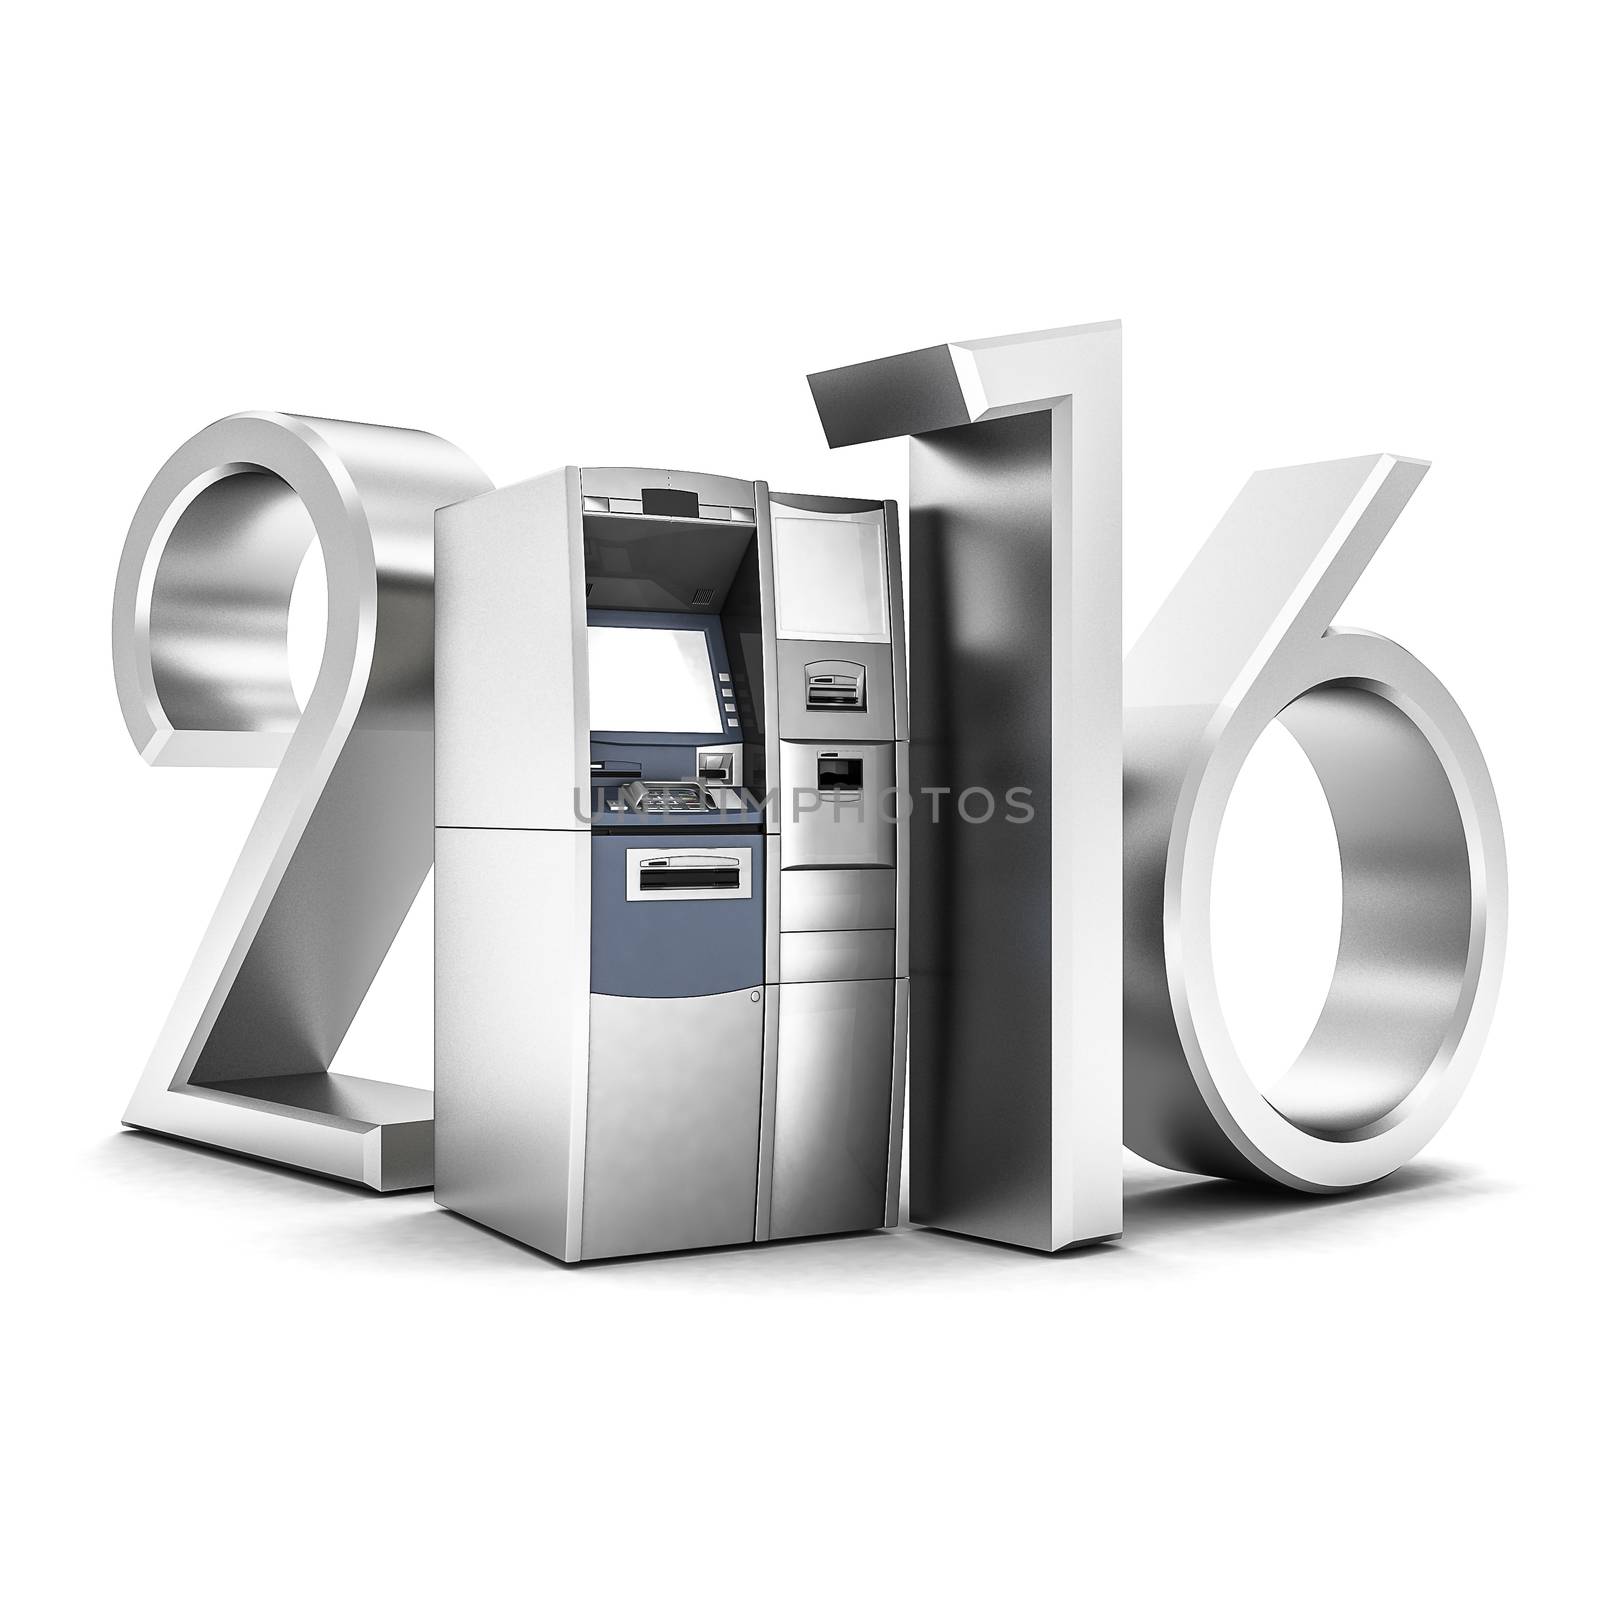 image of the new ATM on white background